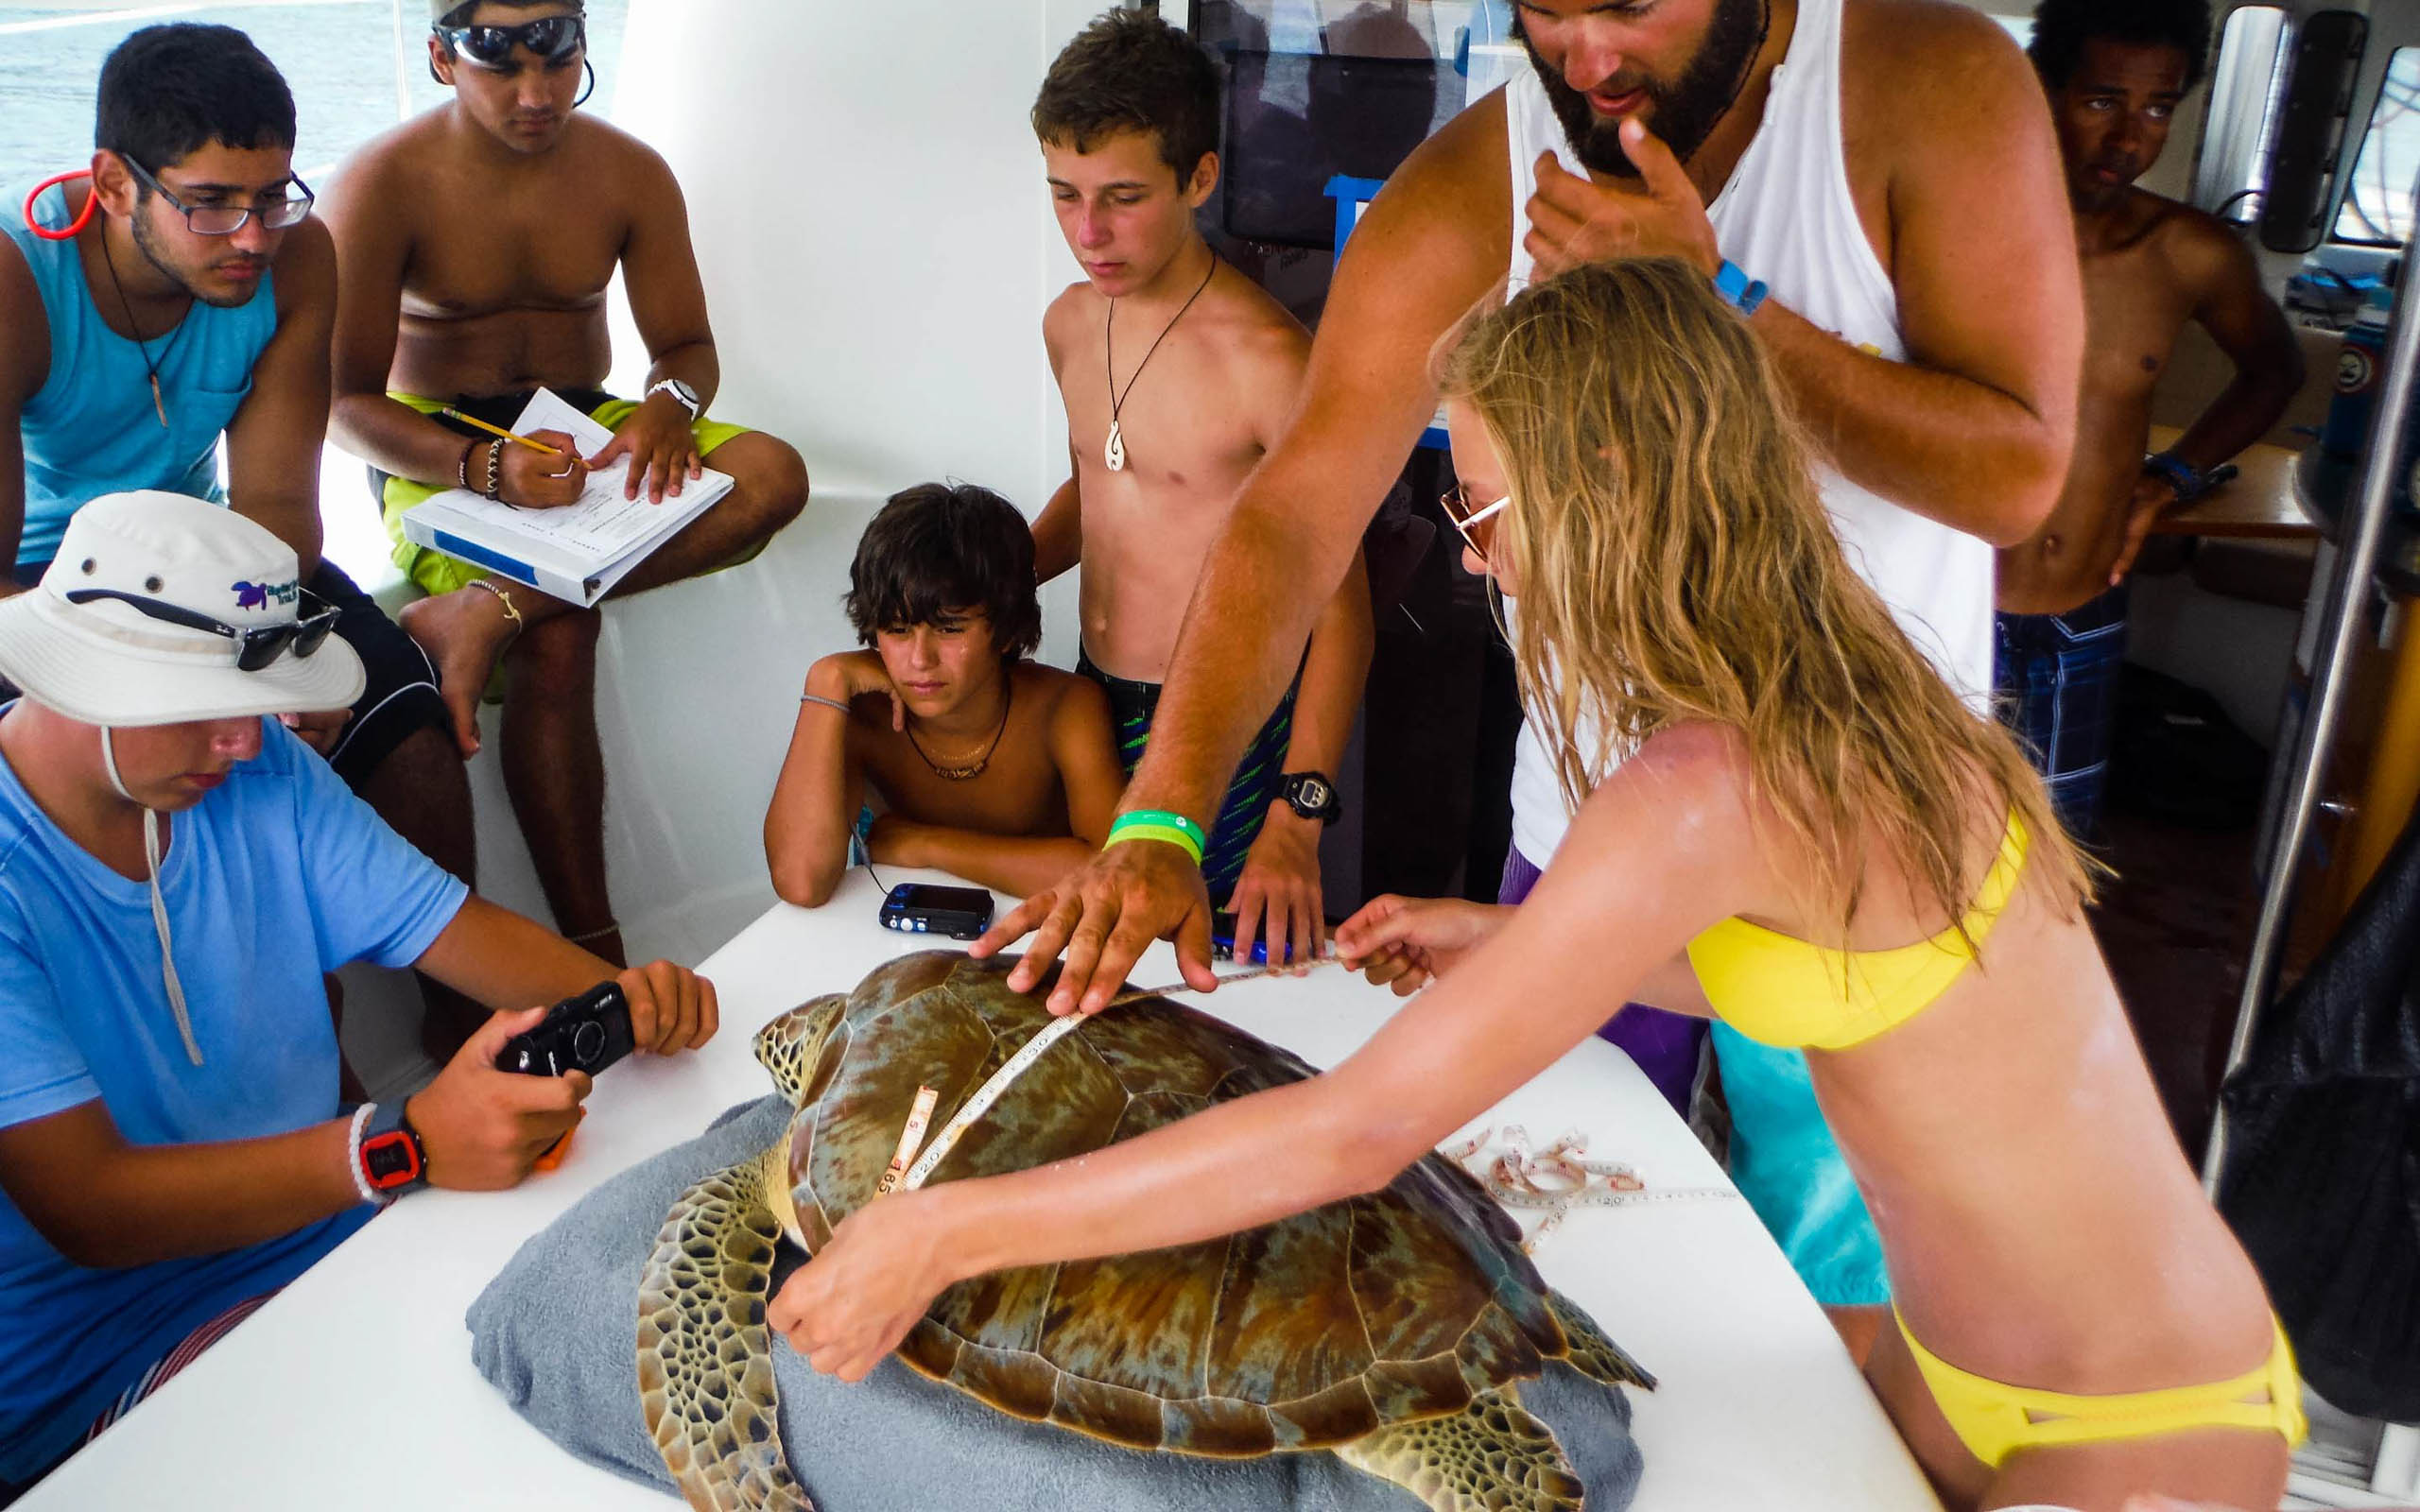 A group of people on a boat looking at a turtle.